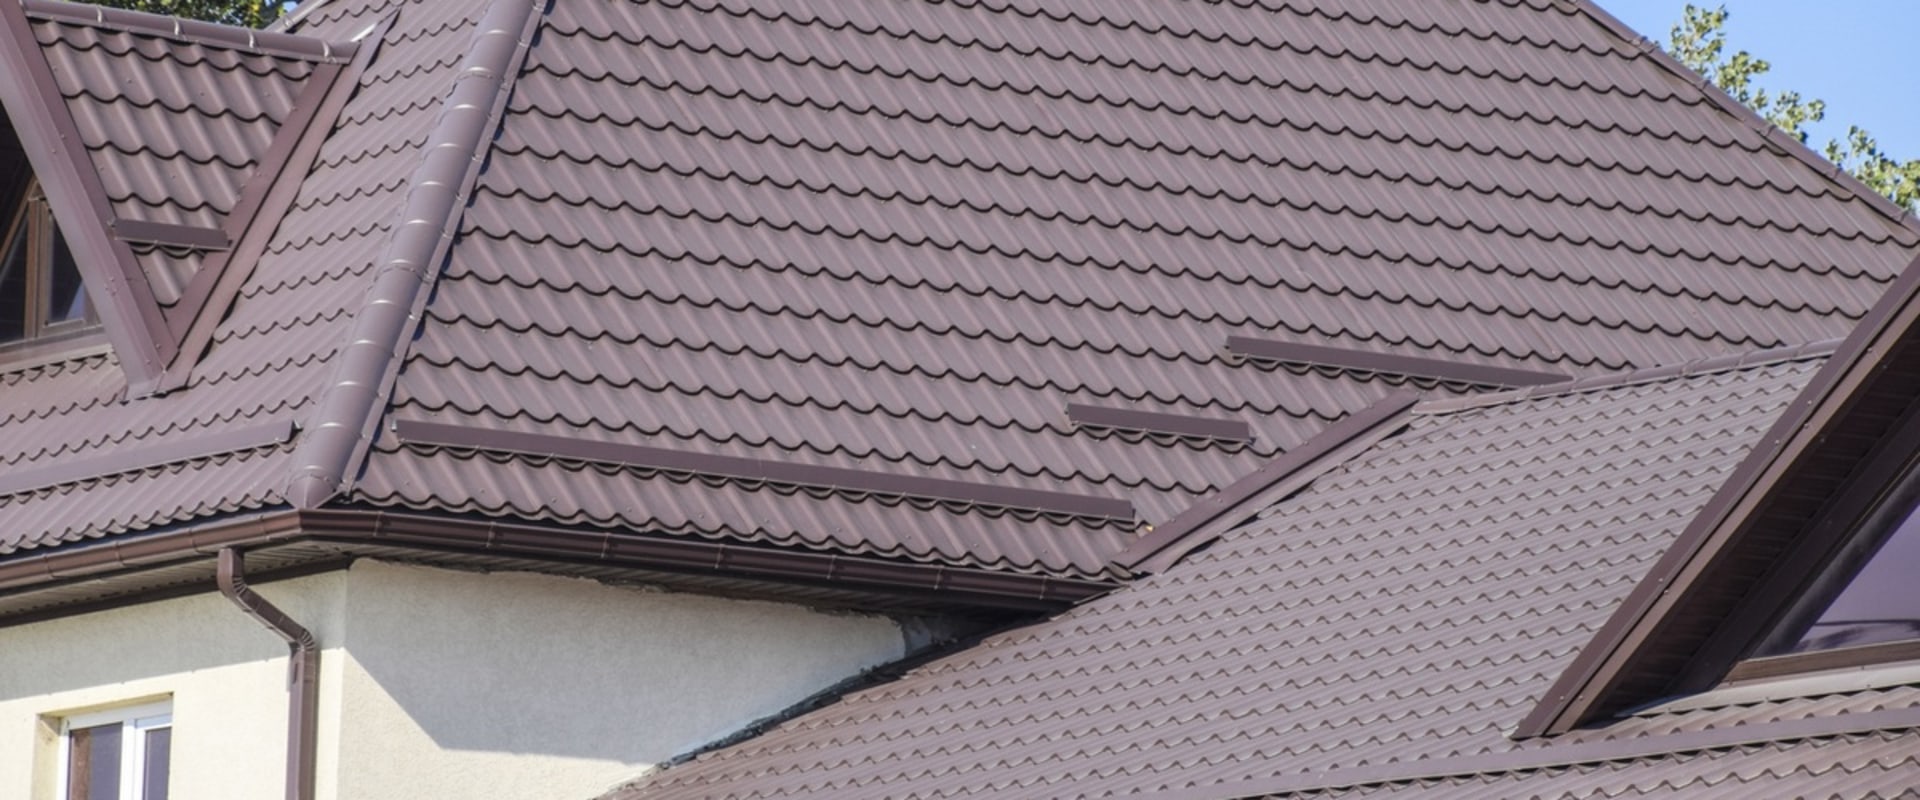 How much does it cost to completely replace a roof?